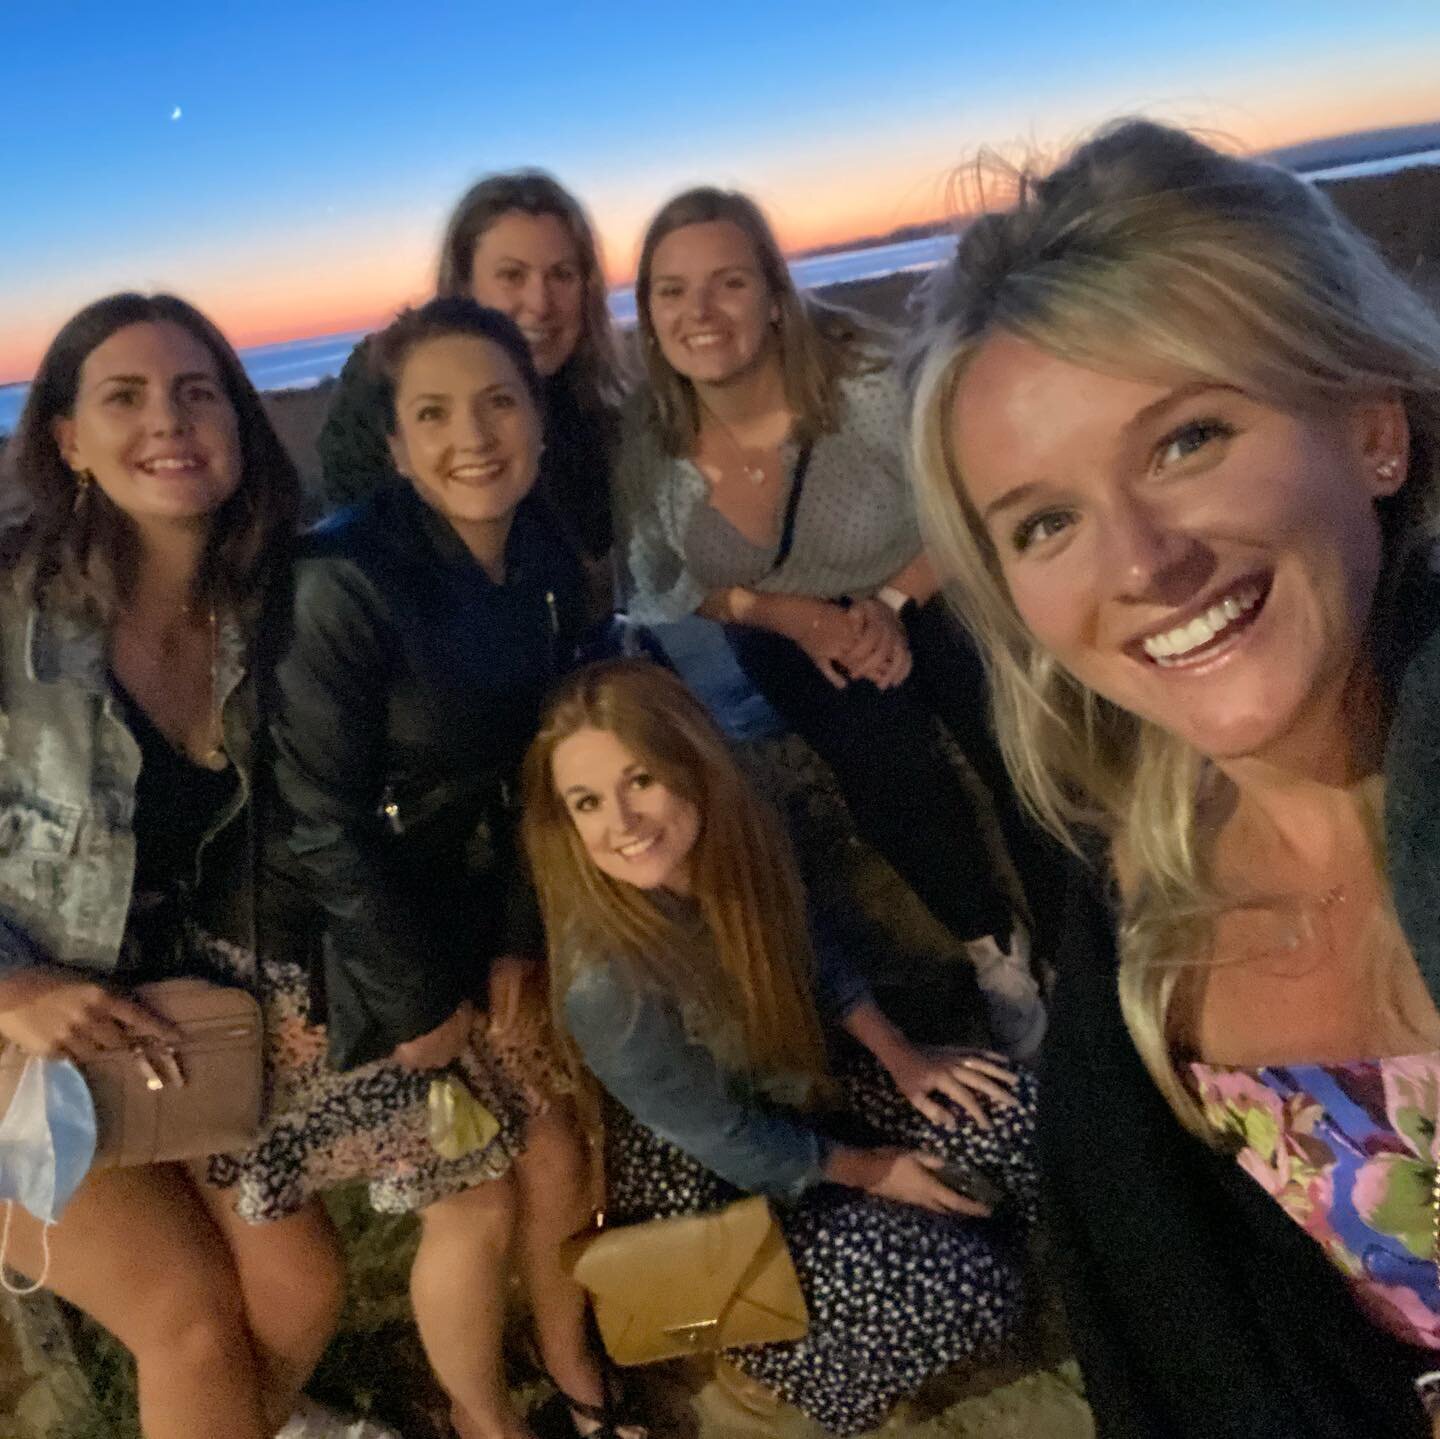 When your gym friends become your gin friends💃🥂🍸🍾☀️

Again, one of the many reasons to exercise&hellip;..friendship ❤️💪🏼

@kayleigh_lee8 @naomiloosemore @bakedwithlove_sf @elska.yoga @theworkout30